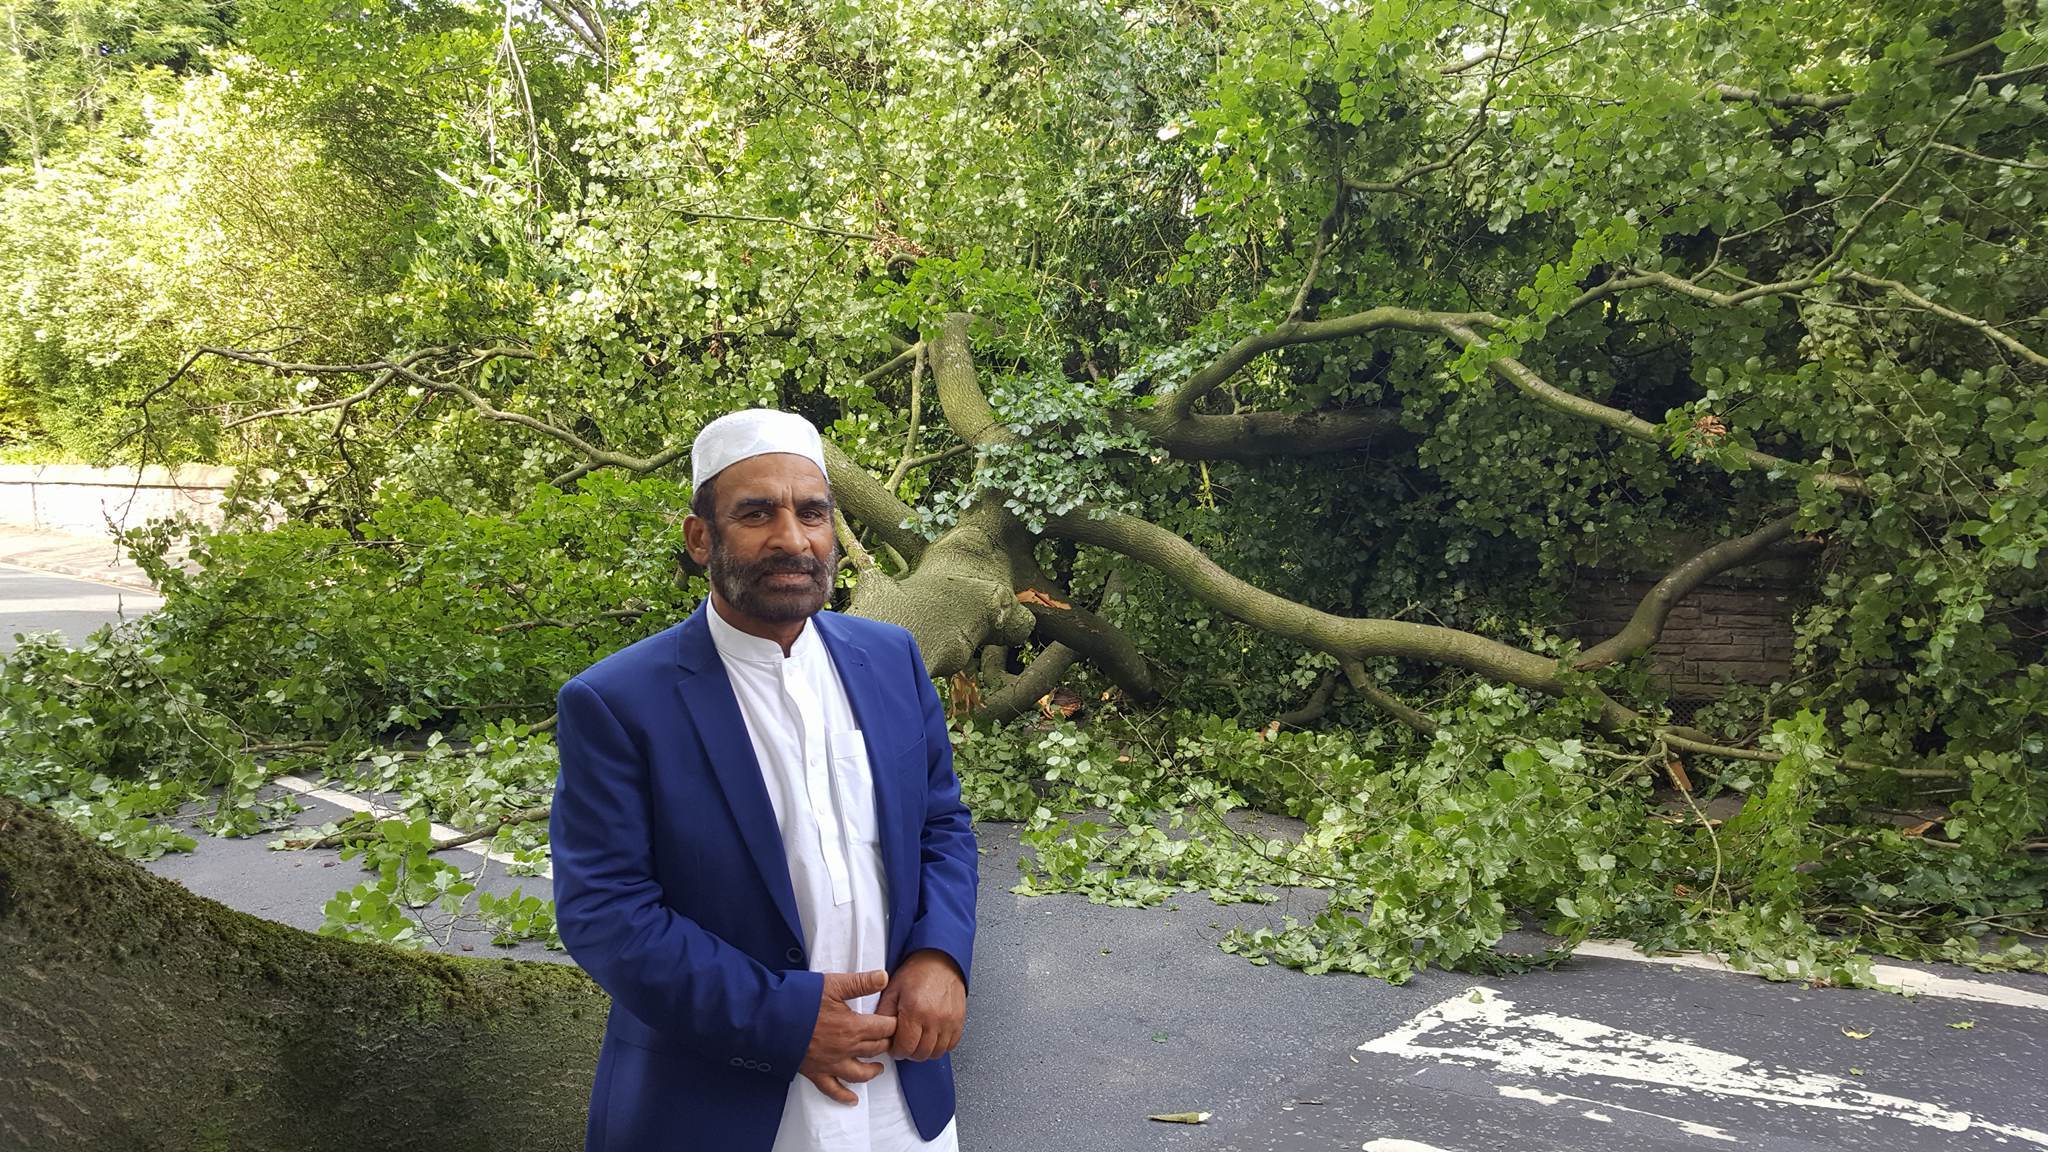 Blackburn with Darwen Council to inspect trees after two near misses